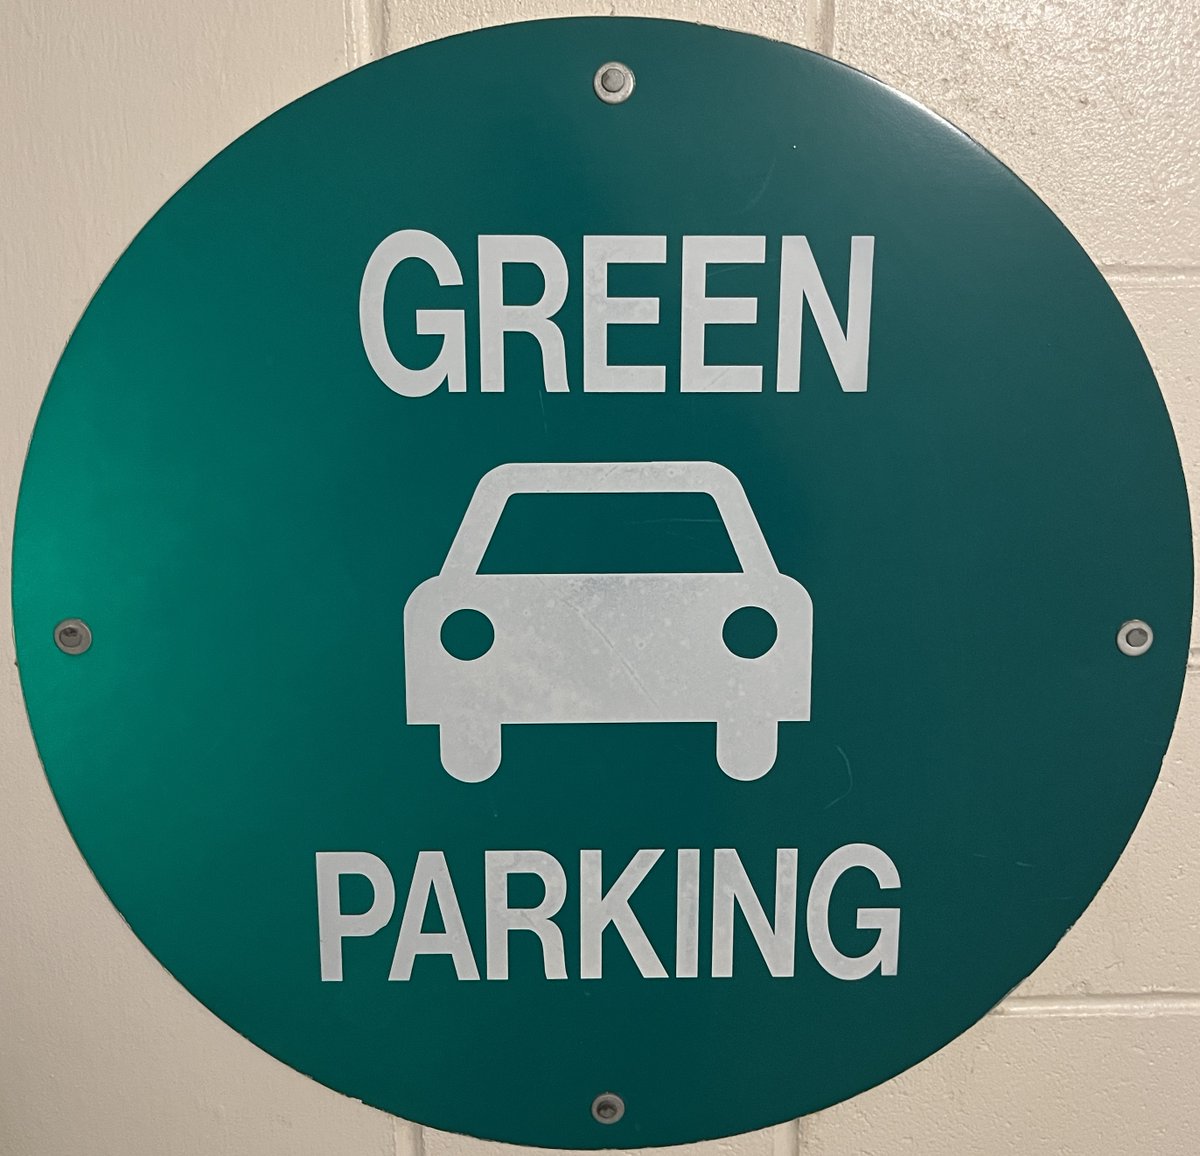 Starting this morning, the elevator lobby for Green Parking (lowest level, off Oregon Street) will be closed for a few days for maintenance. Please seek alternate entry into Krannert Center this week. We apologize for the inconvenience. @FAAAtIllinois #KrannertCenter